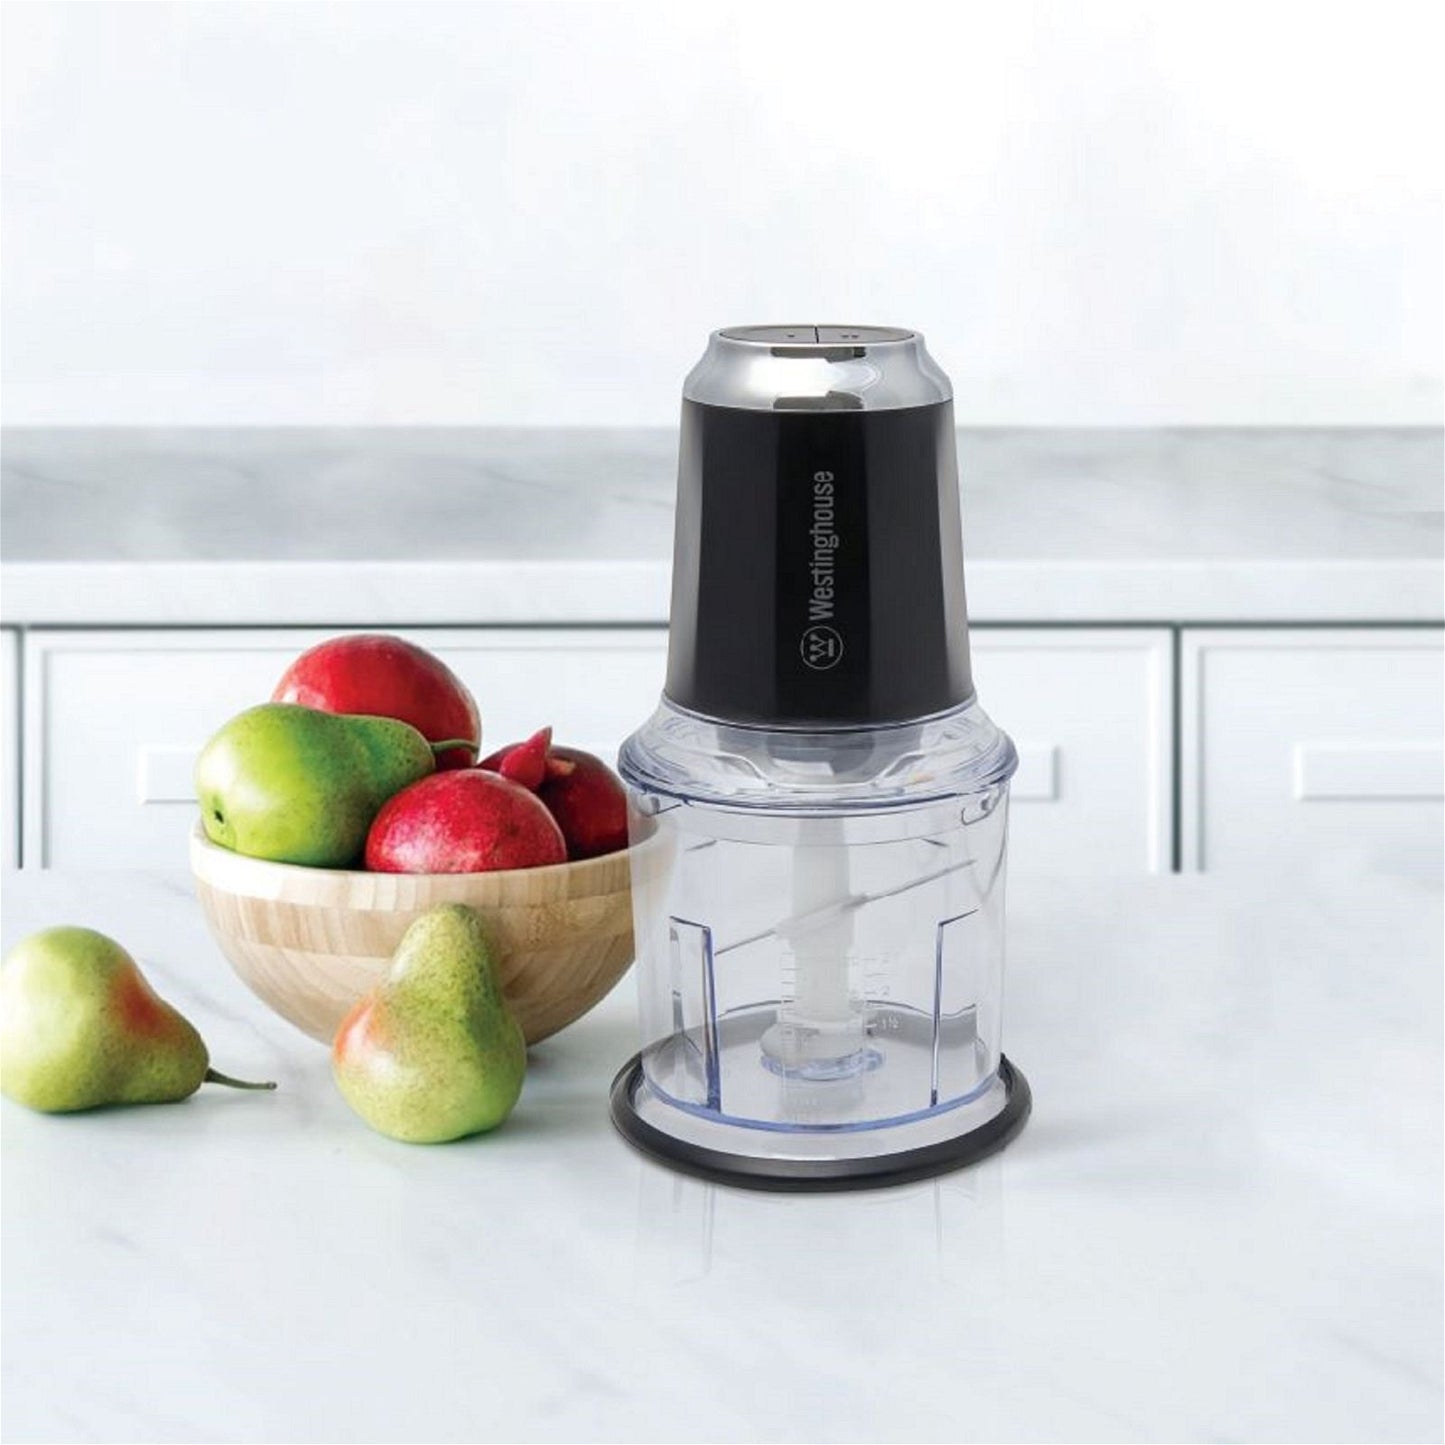 Westinghouse Food Chopper 600ML Black-#product_category#- Distributed by: RVM under license